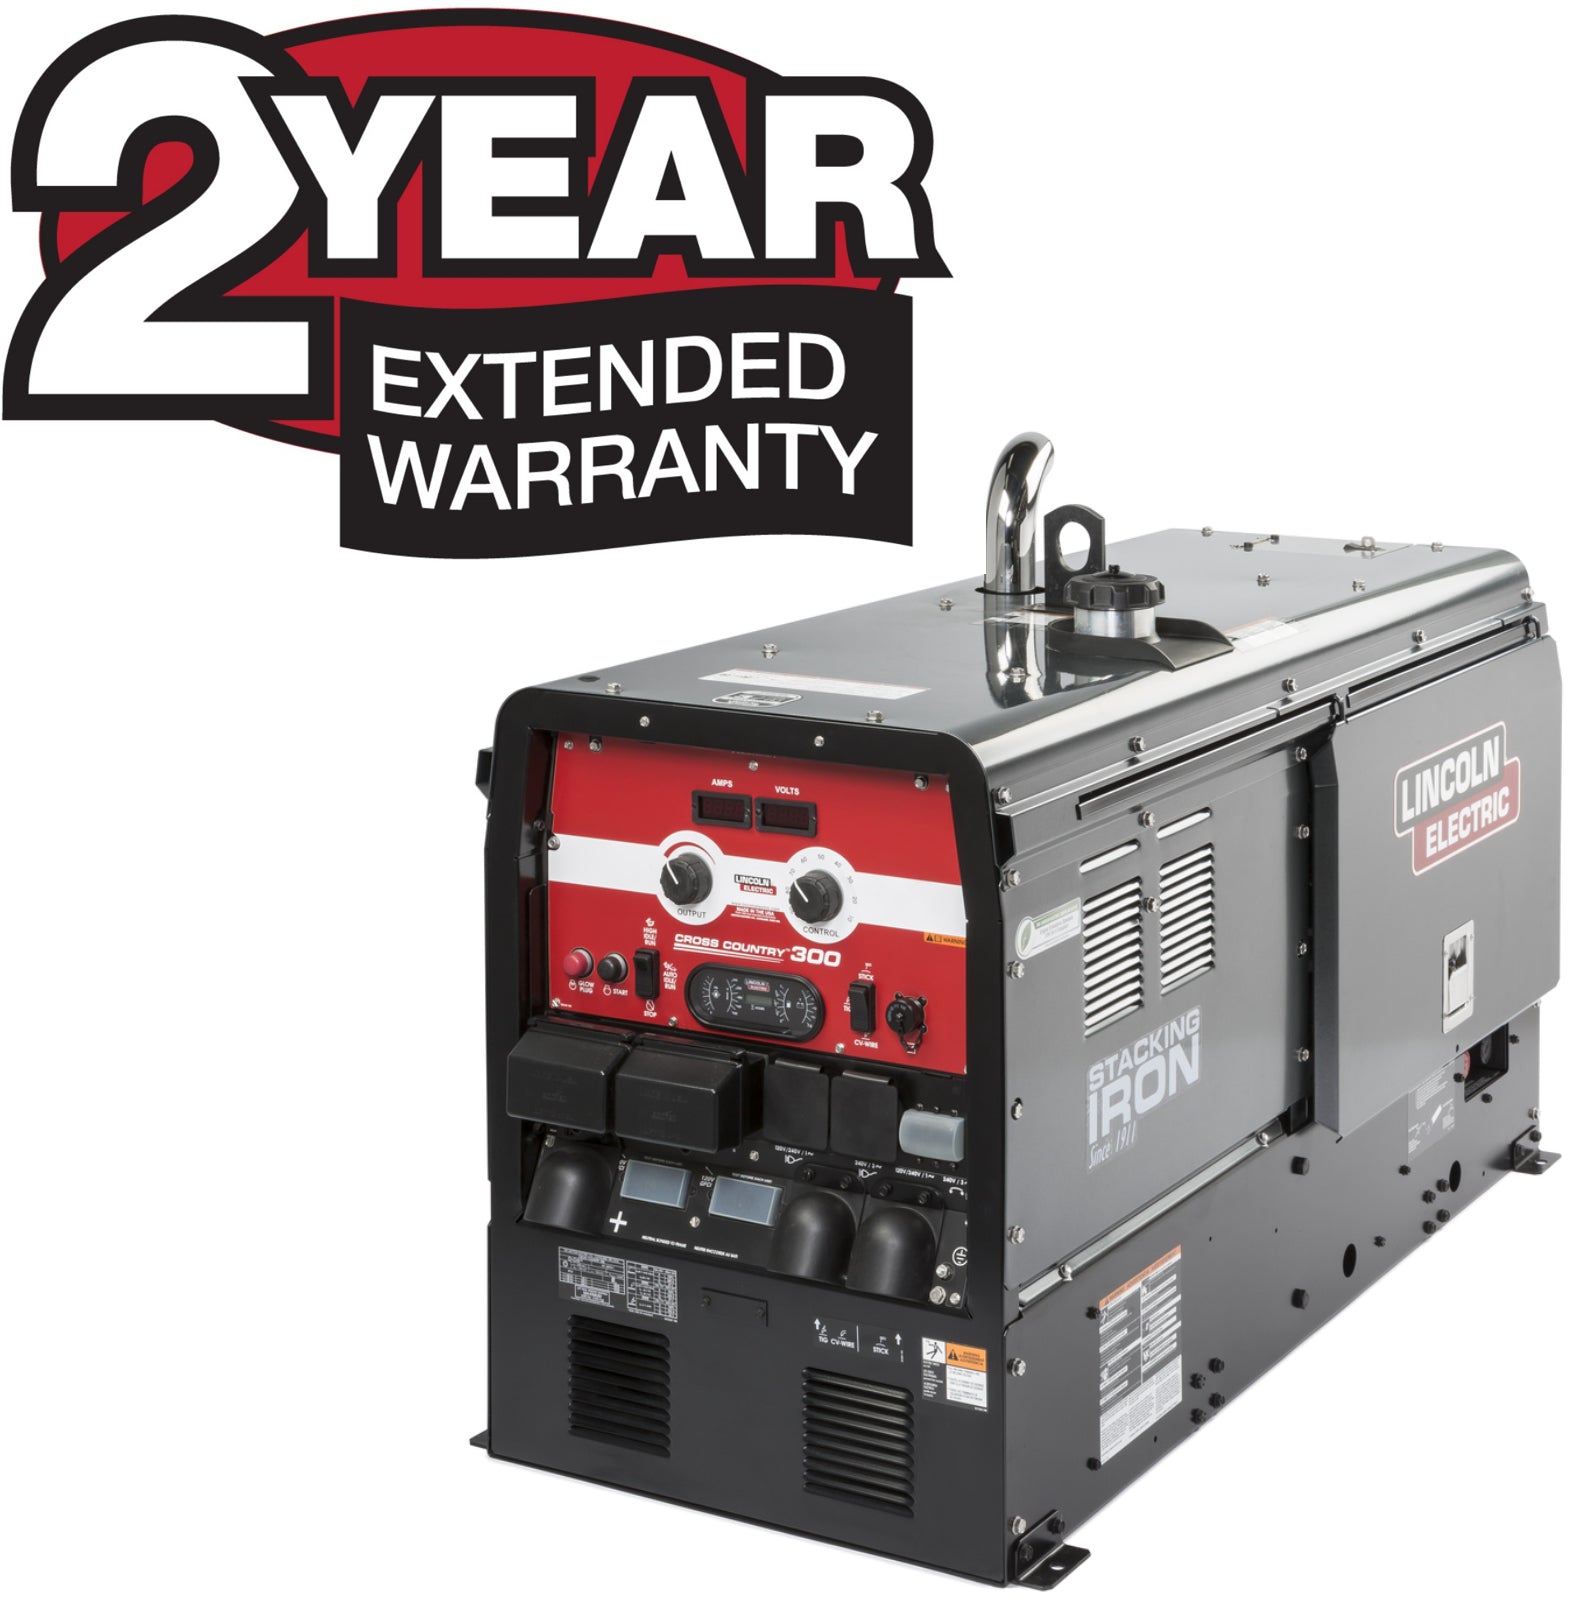 Lincoln 2-Year Extended Warranty - Cross Country 300 X4166